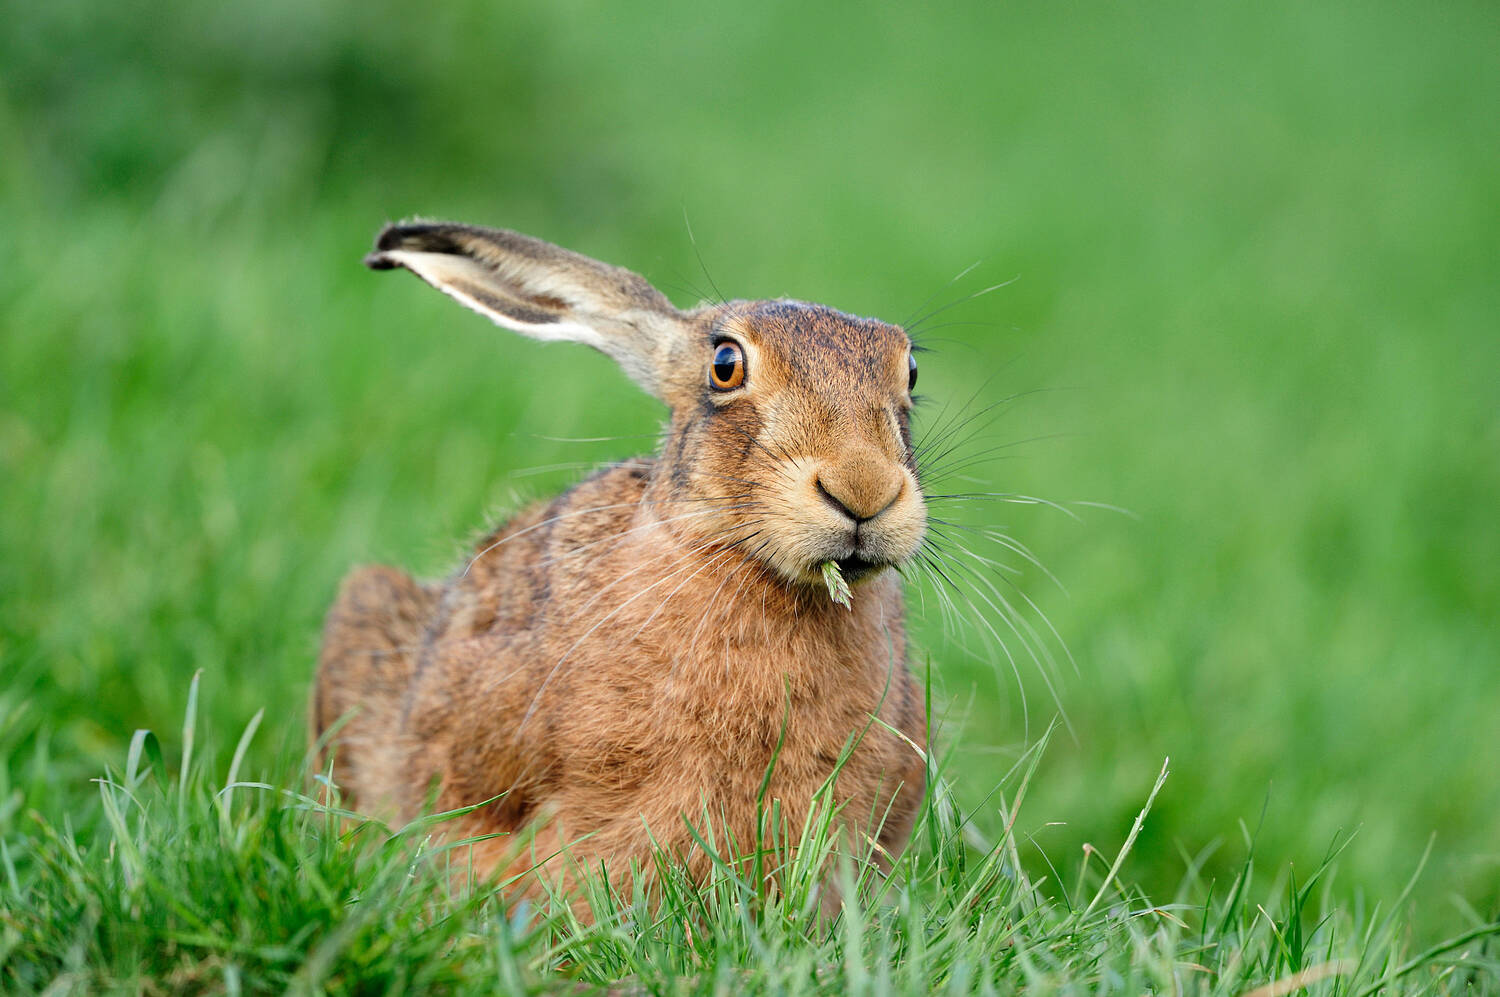 A brown hare sitting among green grass. The black tips of its long ears can be seen. It’s chewing an ear of grass.